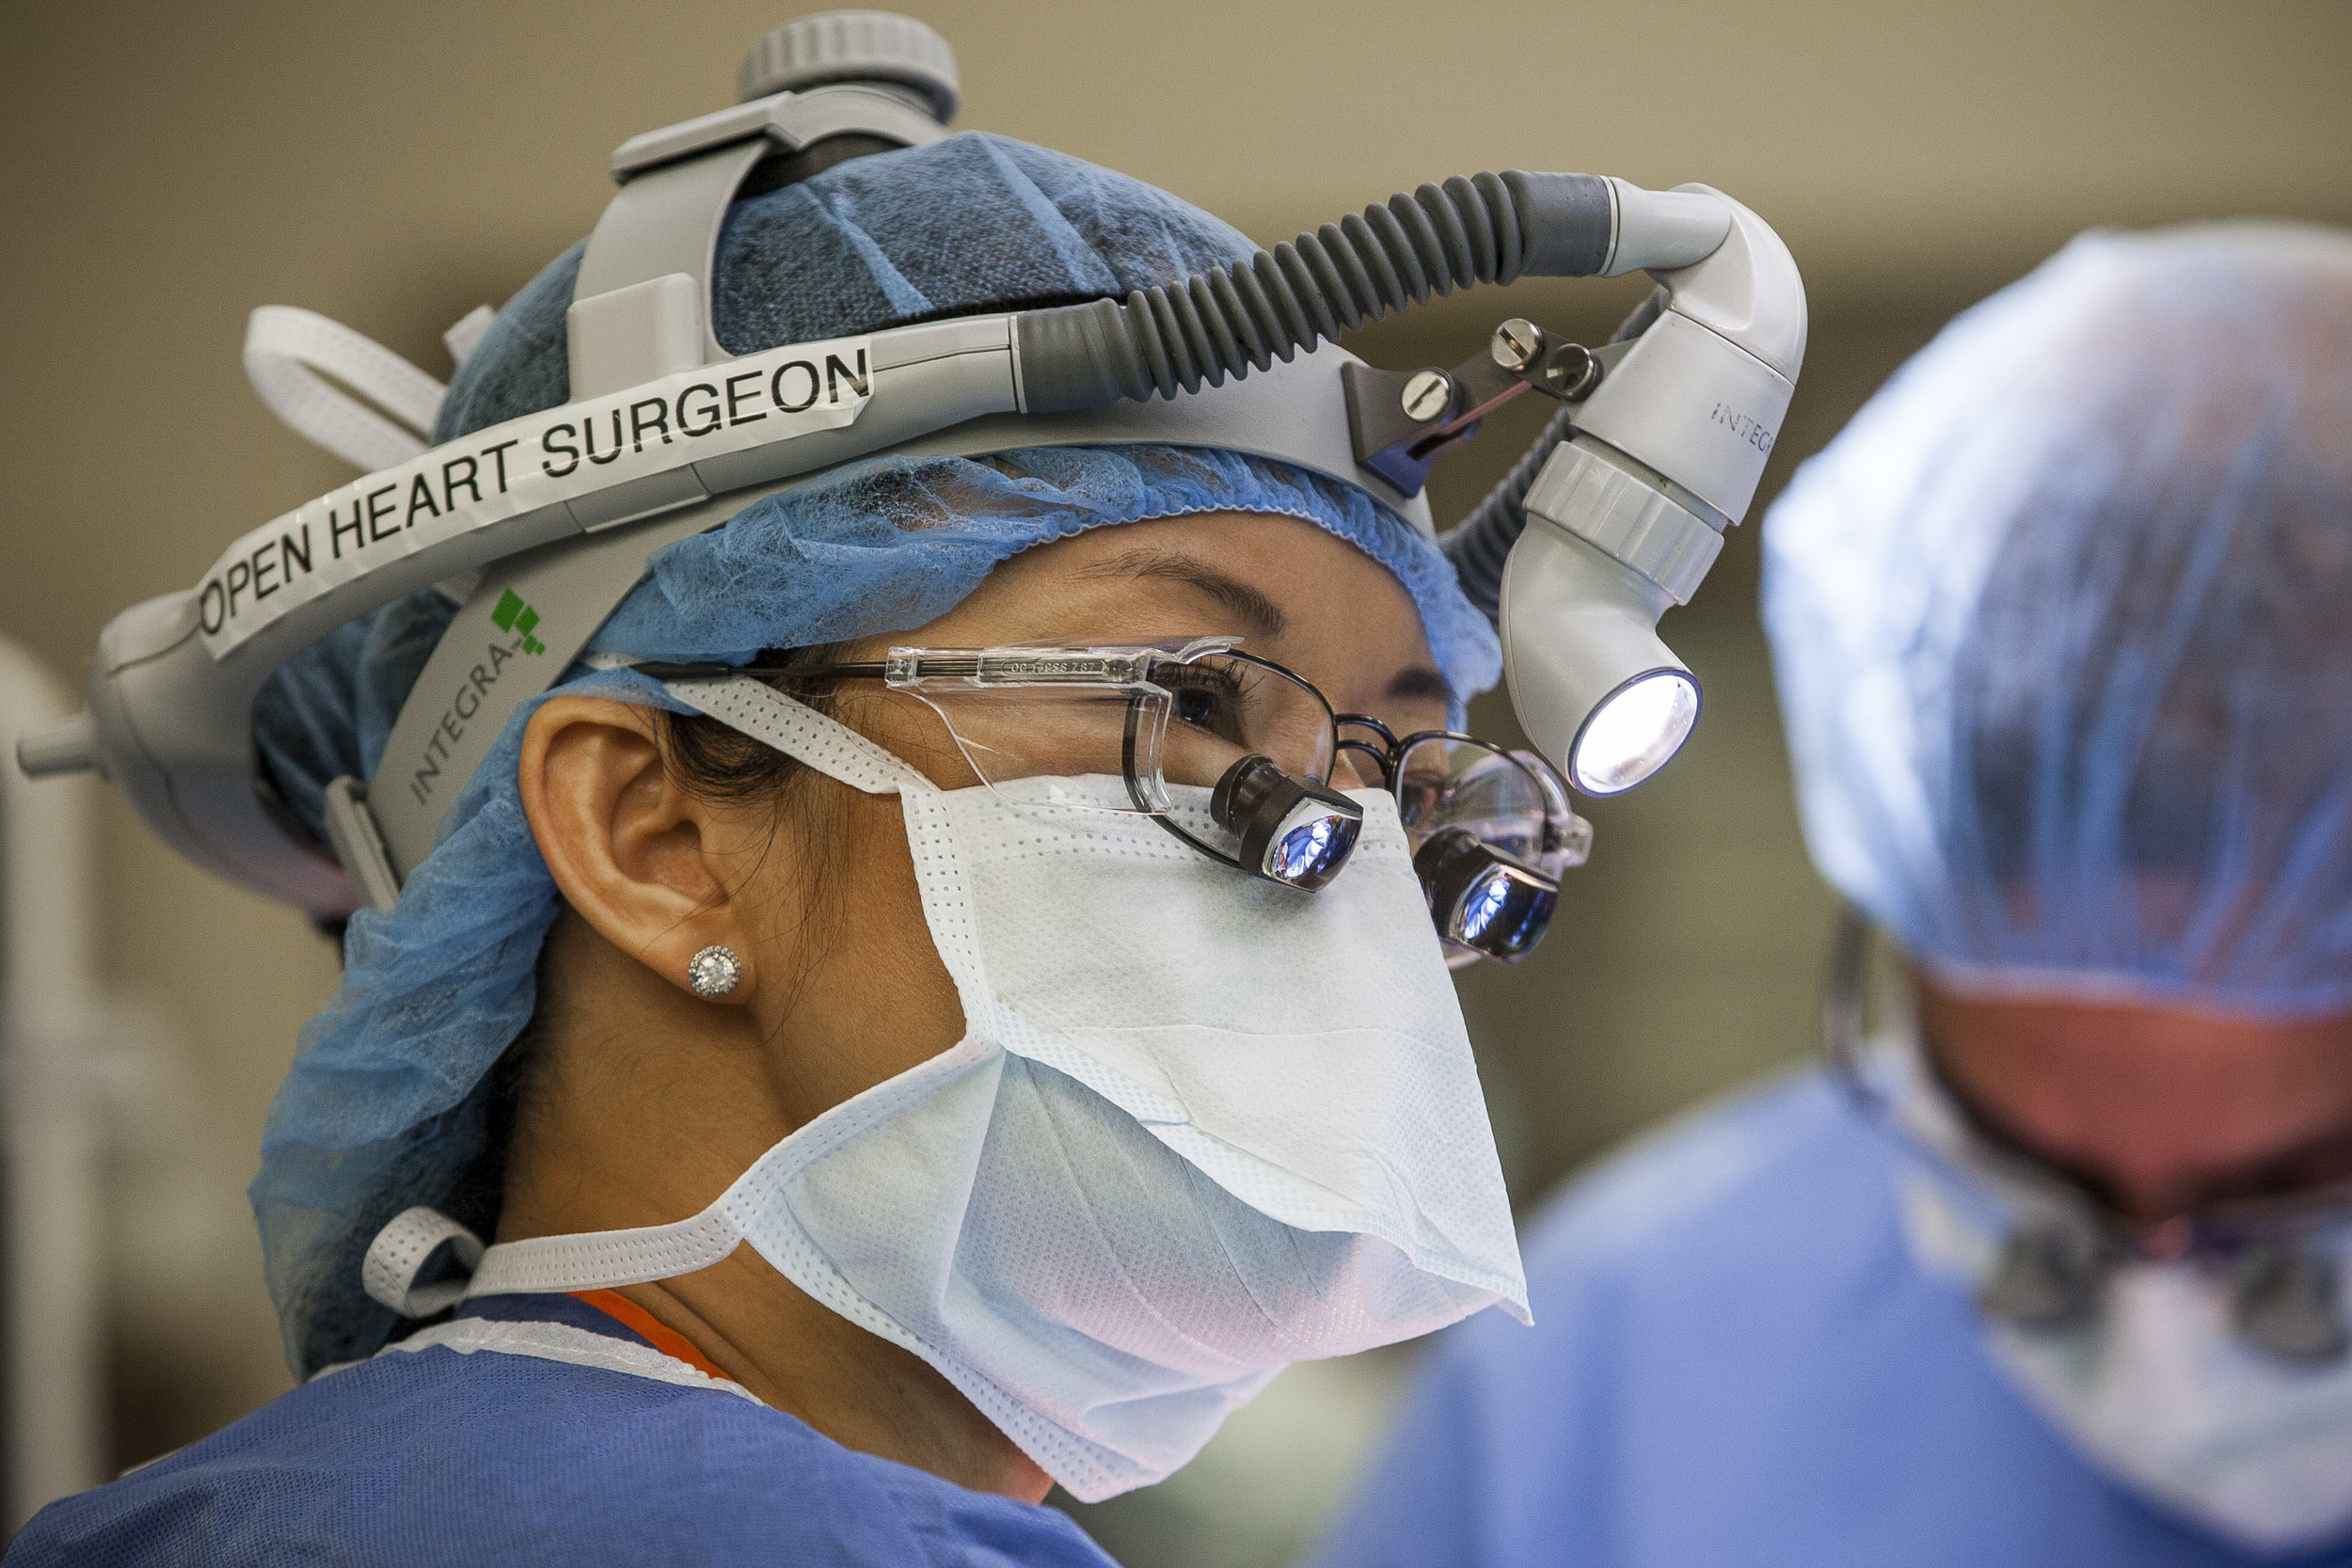  Dr. Quynh Feikes performs performs a surgery to fix an abdominal aneurysm at University Medical Center on Tuesday, May 23, 2017. Dr. Feikes is the only female cardiac surgeon in Nevada. Patrick Connolly Las Vegas Review-Journal @PConnPie 